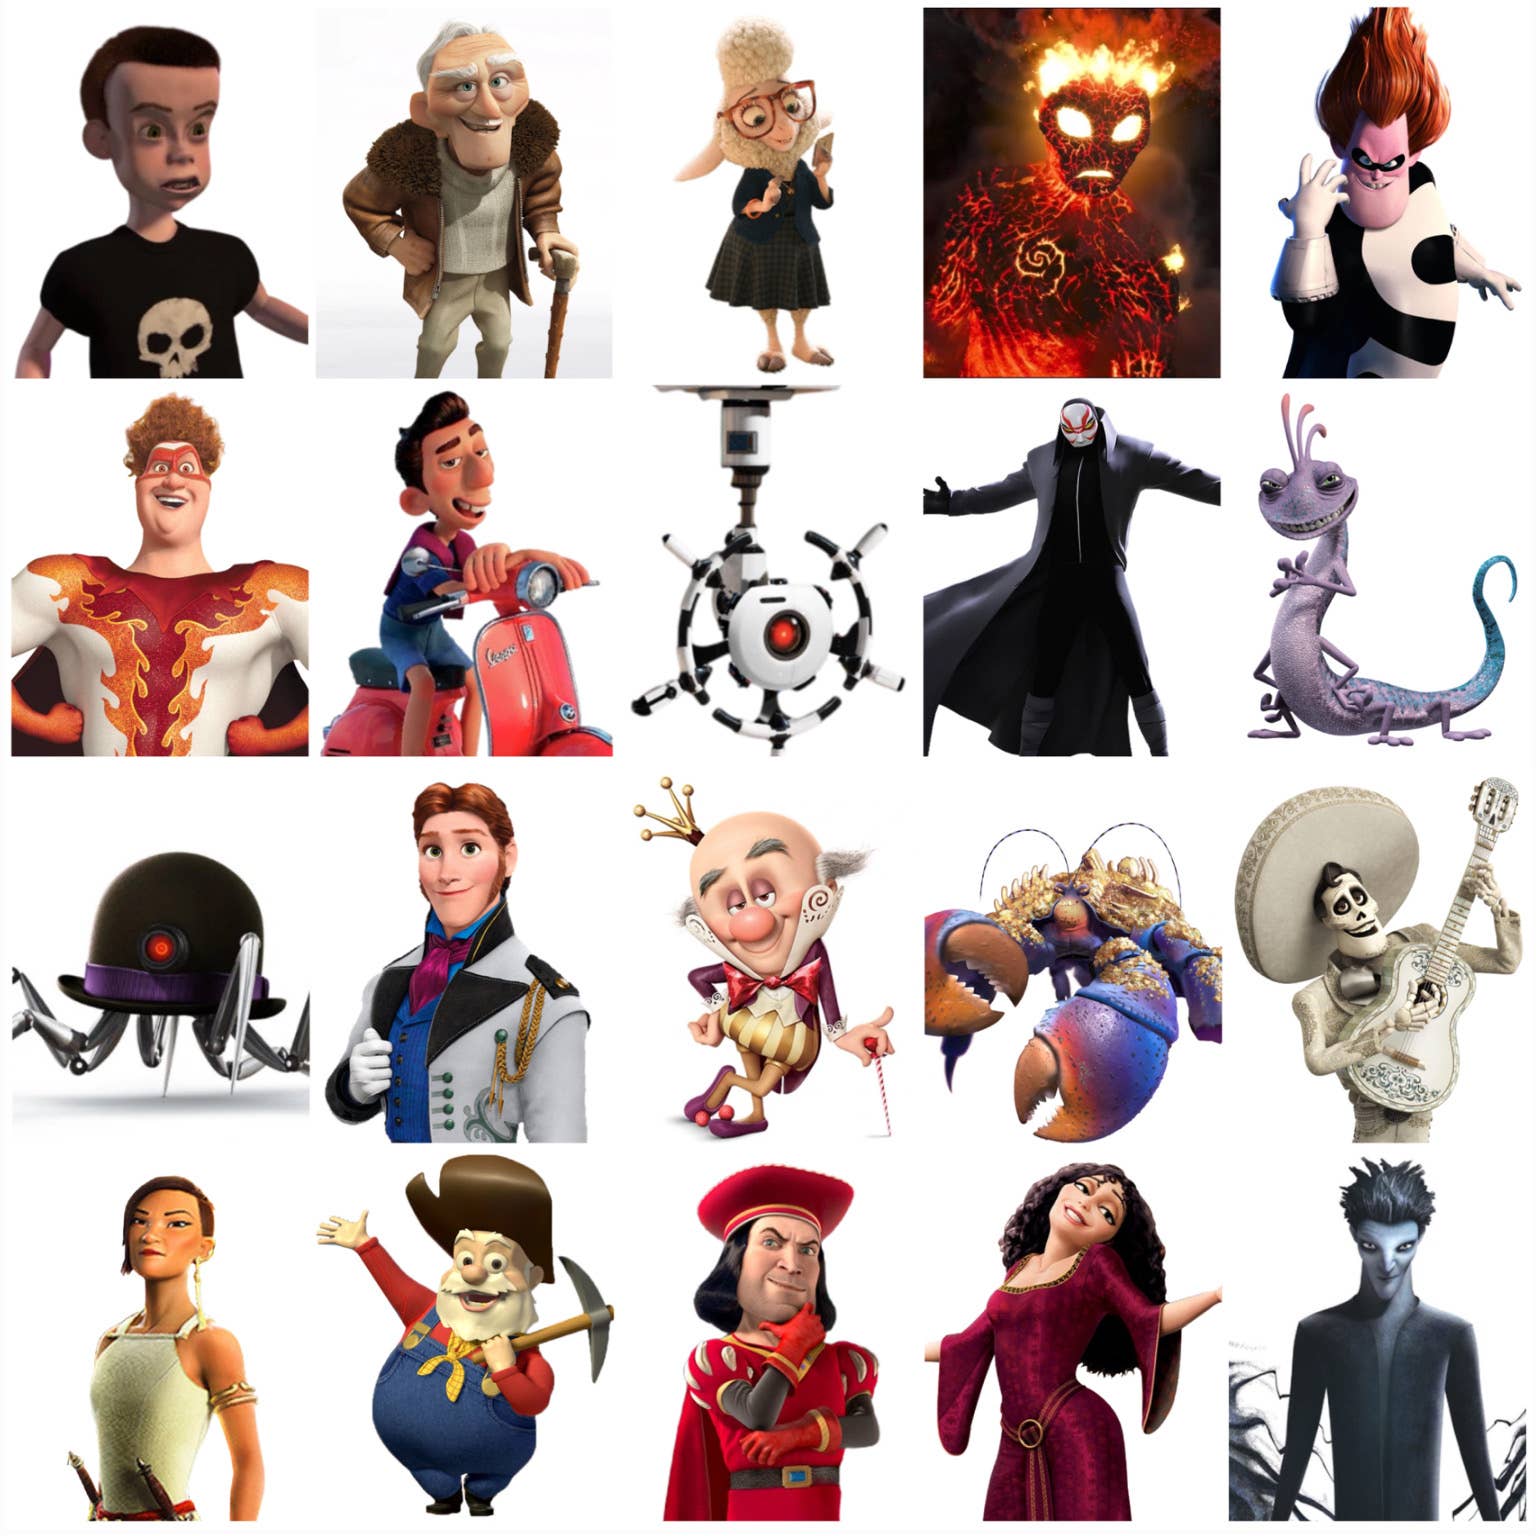 Can You Identify All 18 Of These Animated Movie Villains?